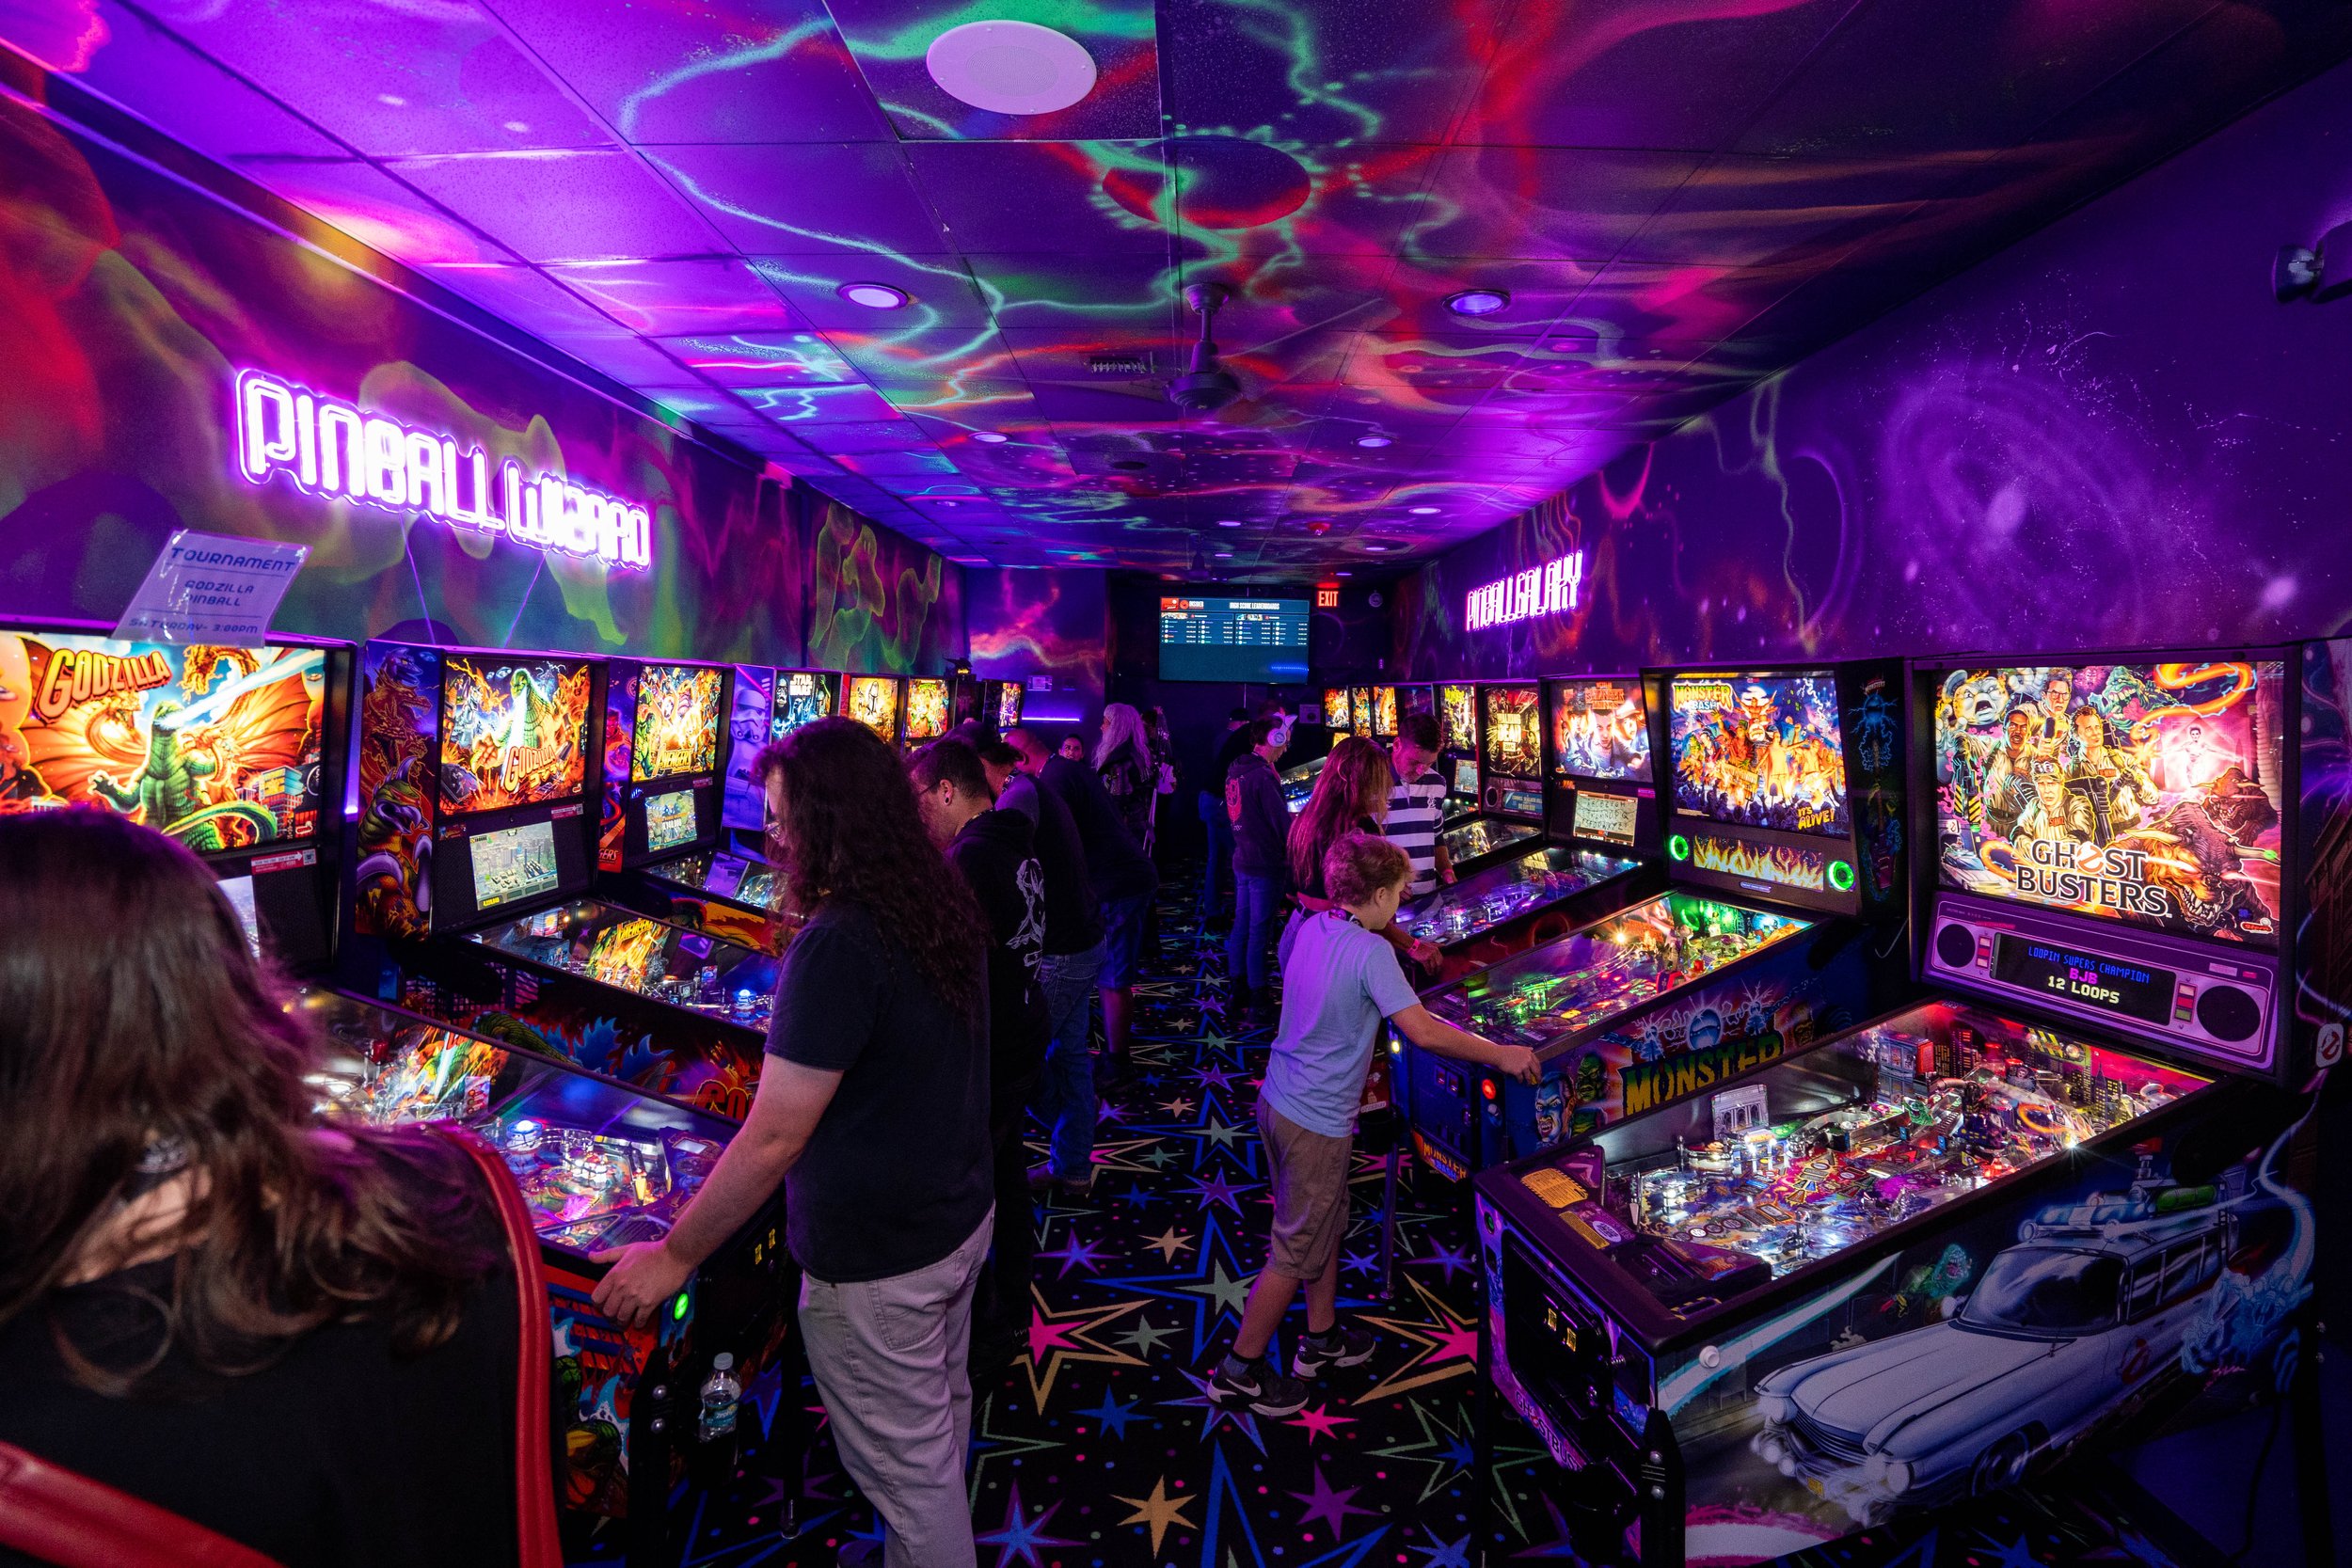 Free Play Florida - Florida's Largest Arcade, Pinball, and Console